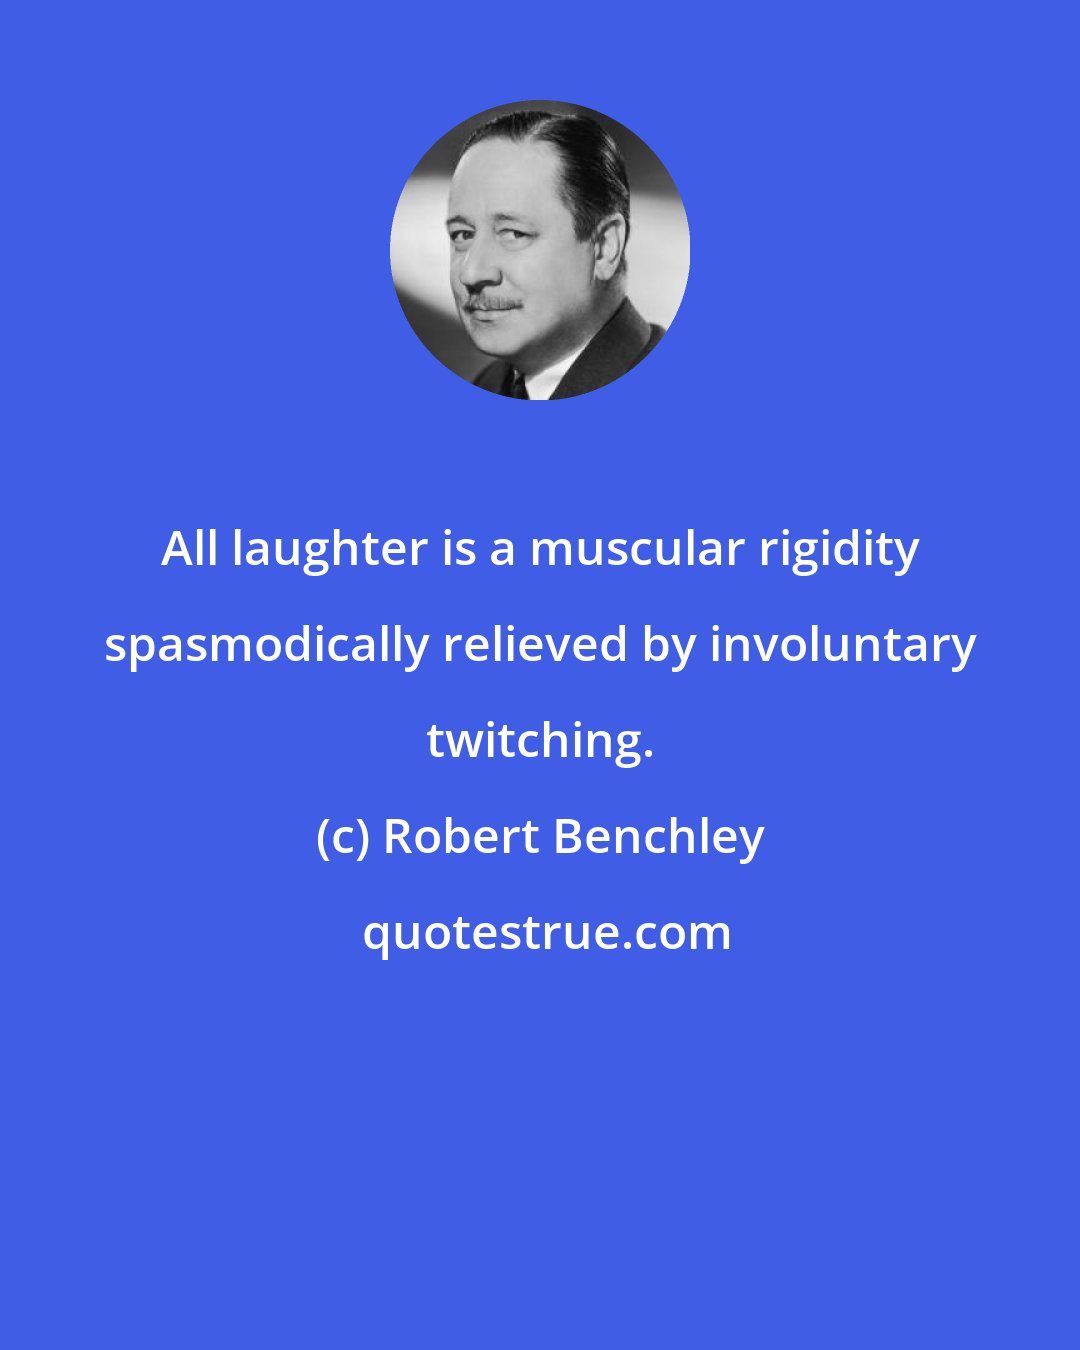 Robert Benchley: All laughter is a muscular rigidity spasmodically relieved by involuntary twitching.